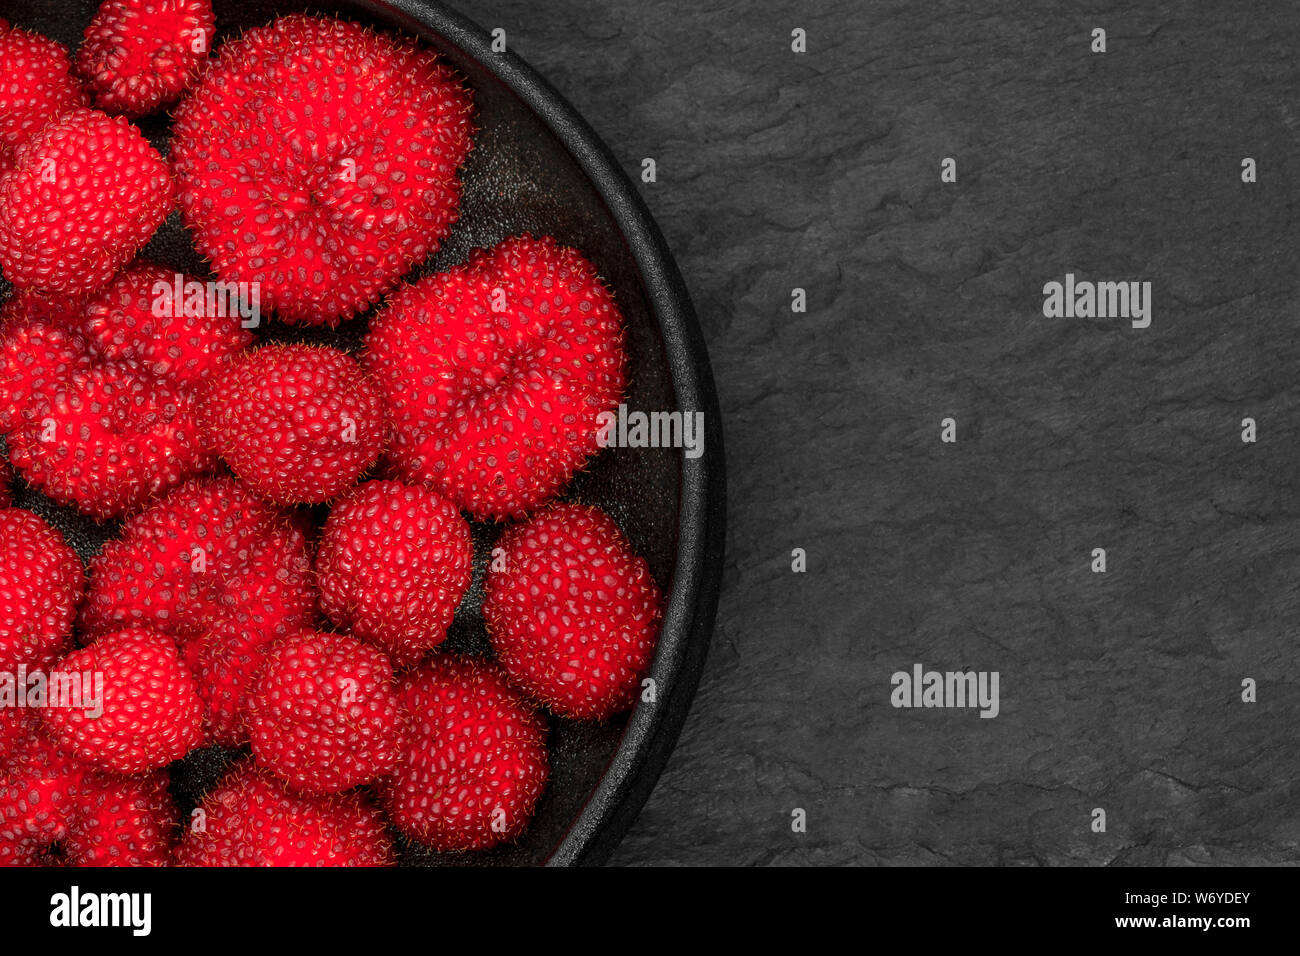 Red balloon berries (Rubus Illecebrosus) in round and black iron cast bowl on black stone background with copy space Stock Photo